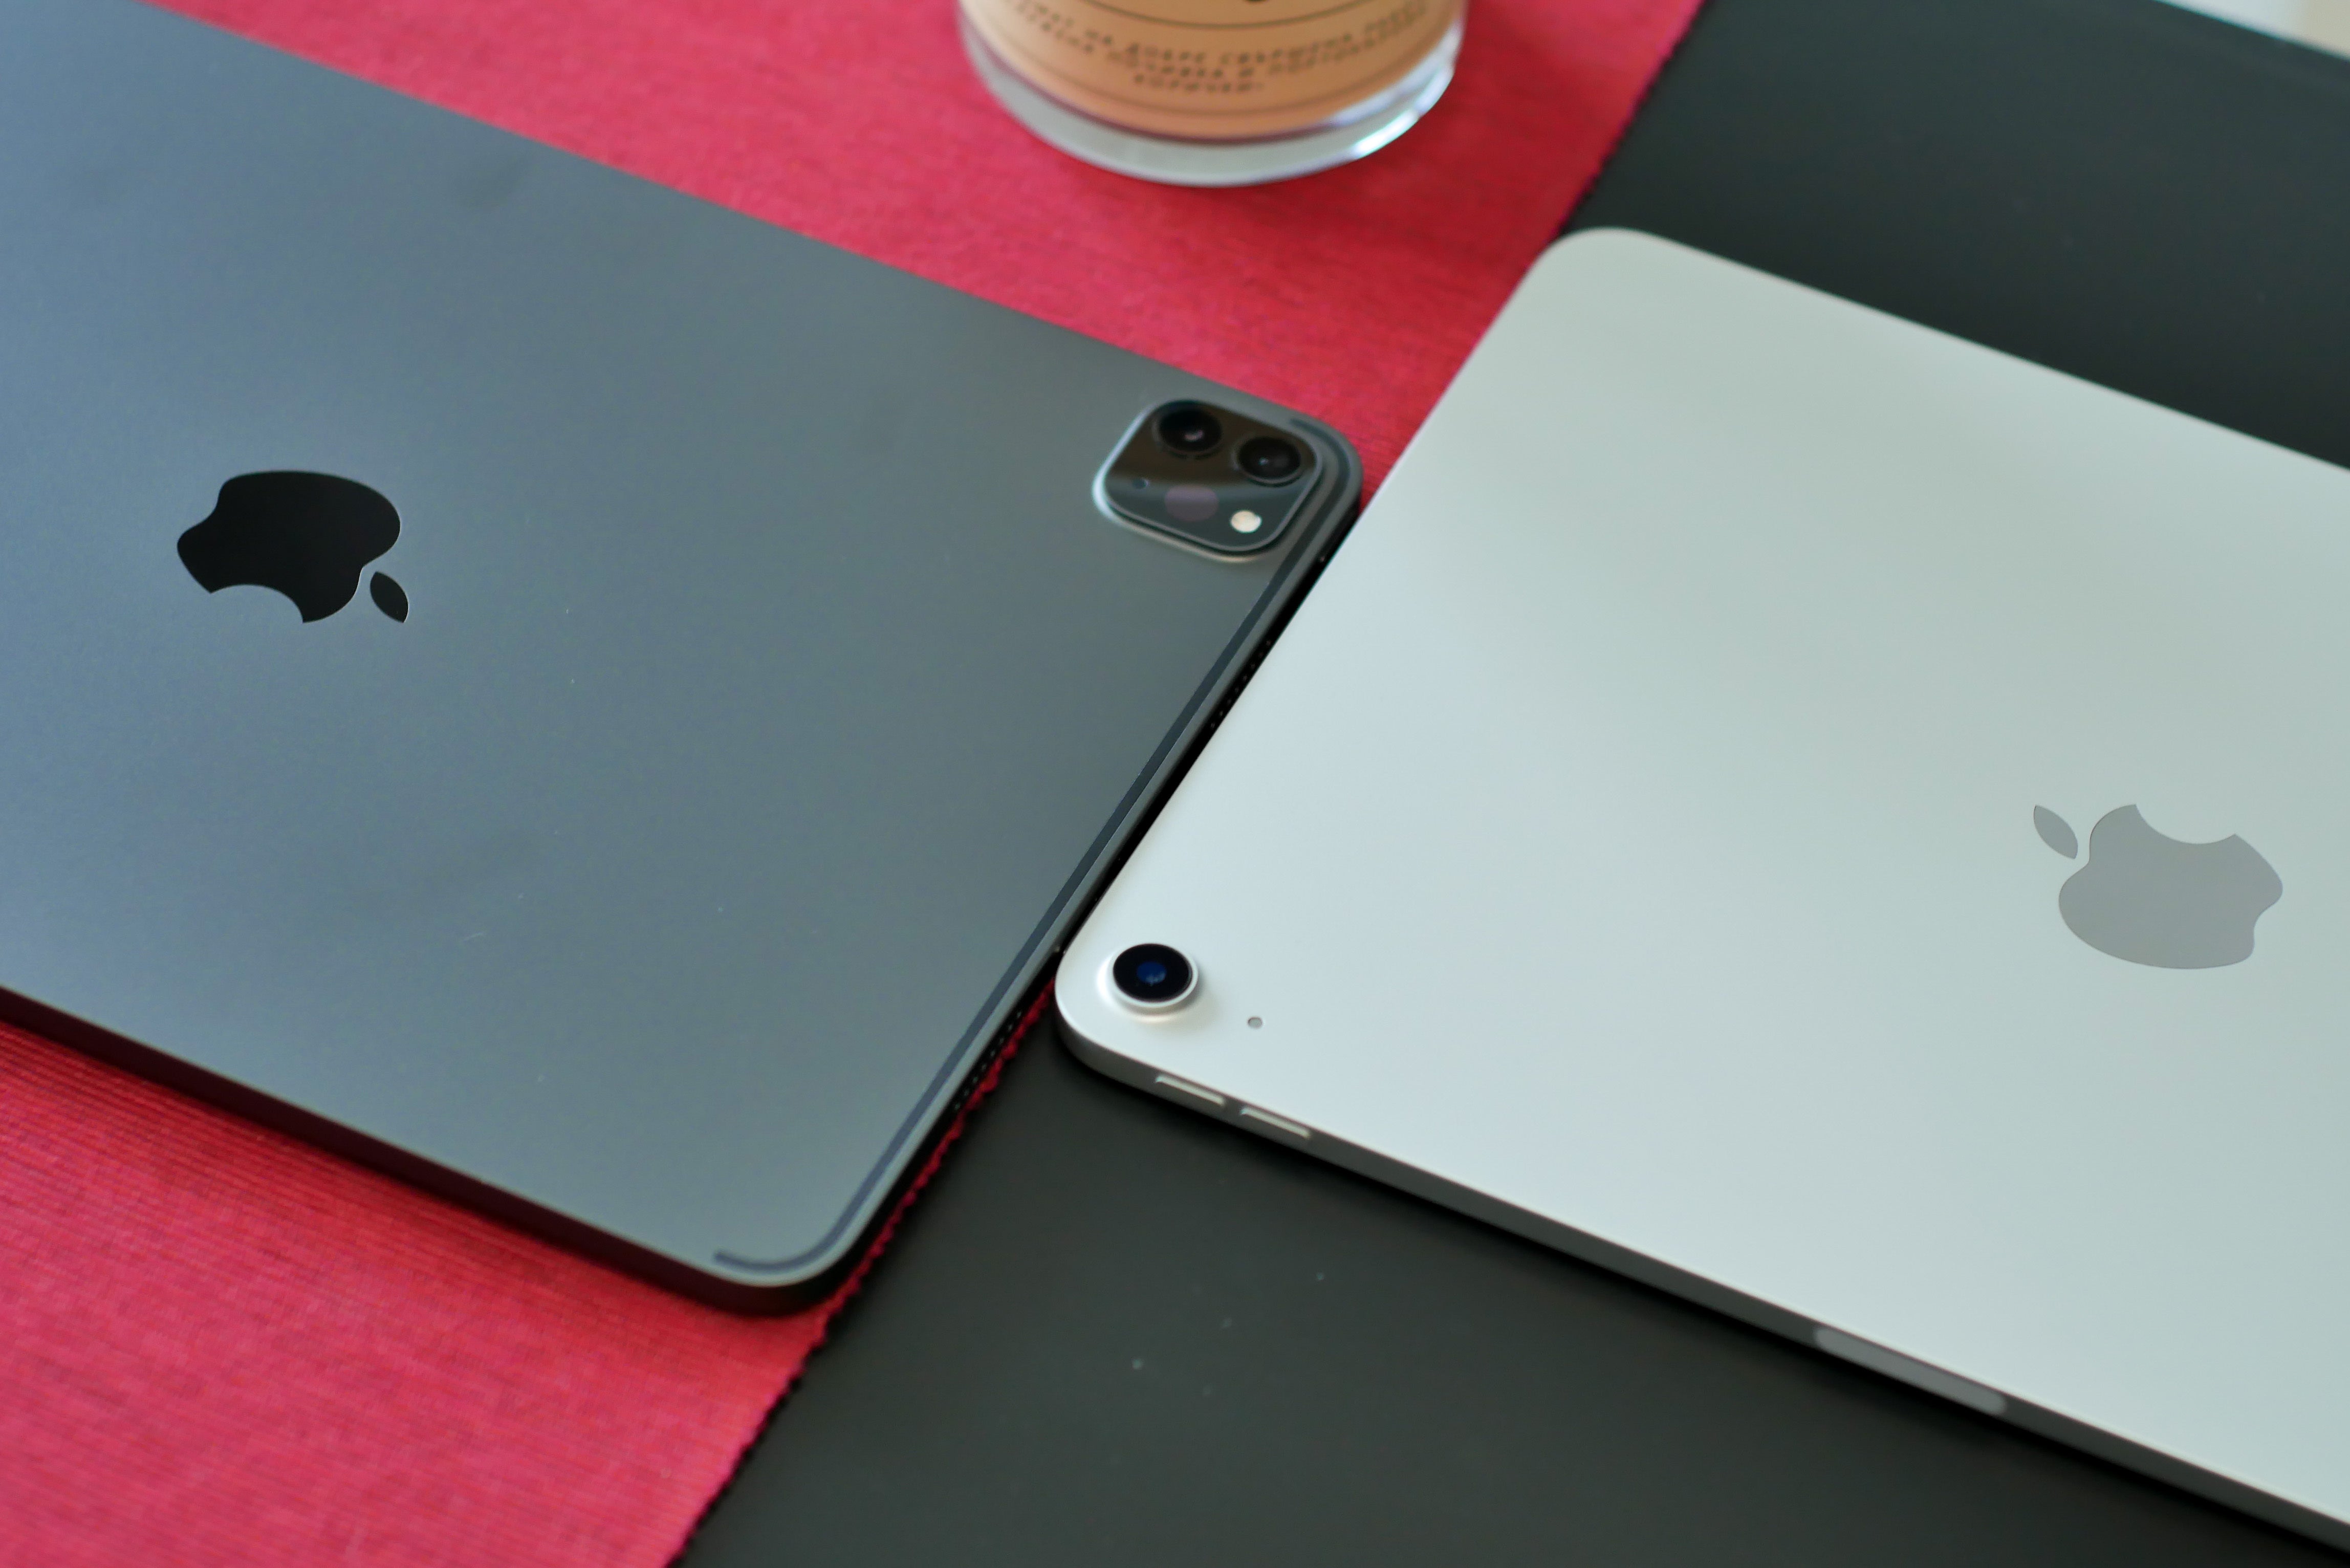 iPad Pro 2021 vs iPad Air 4: How much of a difference?